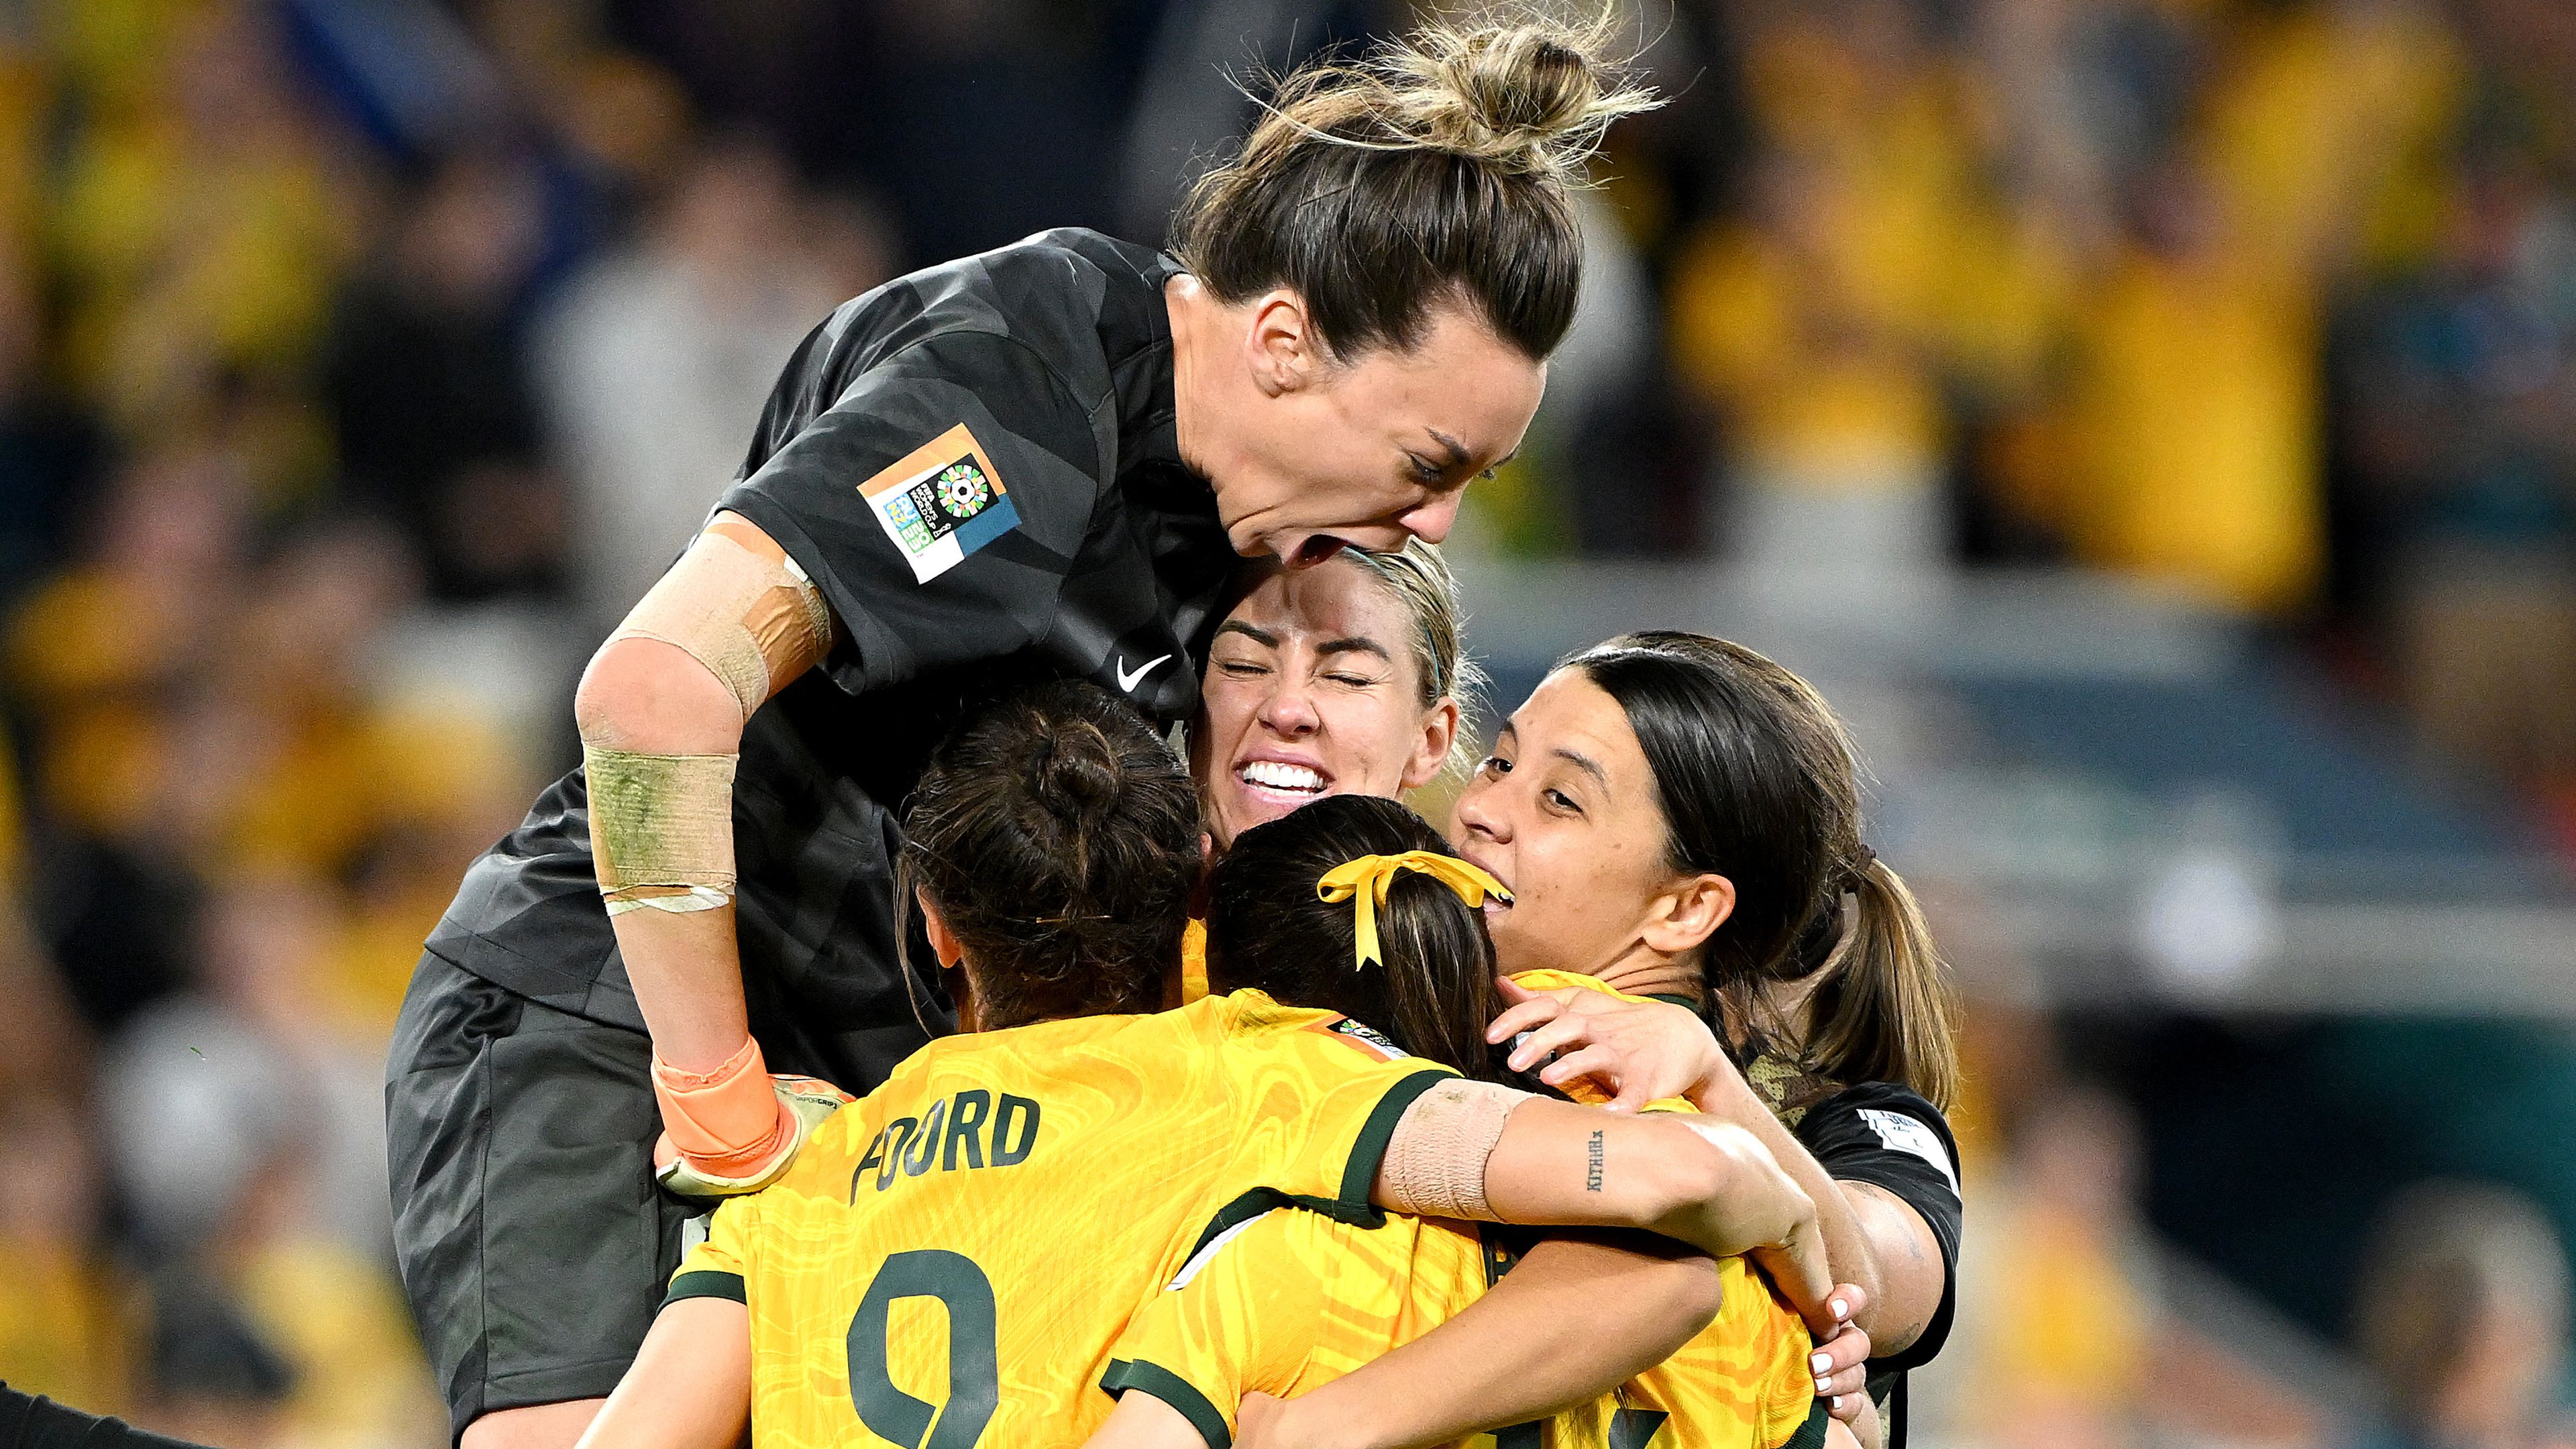 BRISBANE, AUSTRALIA - AUGUST 12: Mackenzie Arnold of Australia celebrates with her team mates after Cortnee Vine of Australia scores her team&#x27;s tenth penalty in the penalty shoot out during the FIFA Women&#x27;s World Cup Australia &amp; New Zealand 2023 Quarter Final match between Australia and France at Brisbane Stadium on August 12, 2023 in Brisbane, Australia. (Photo by Bradley Kanaris/Getty Images)